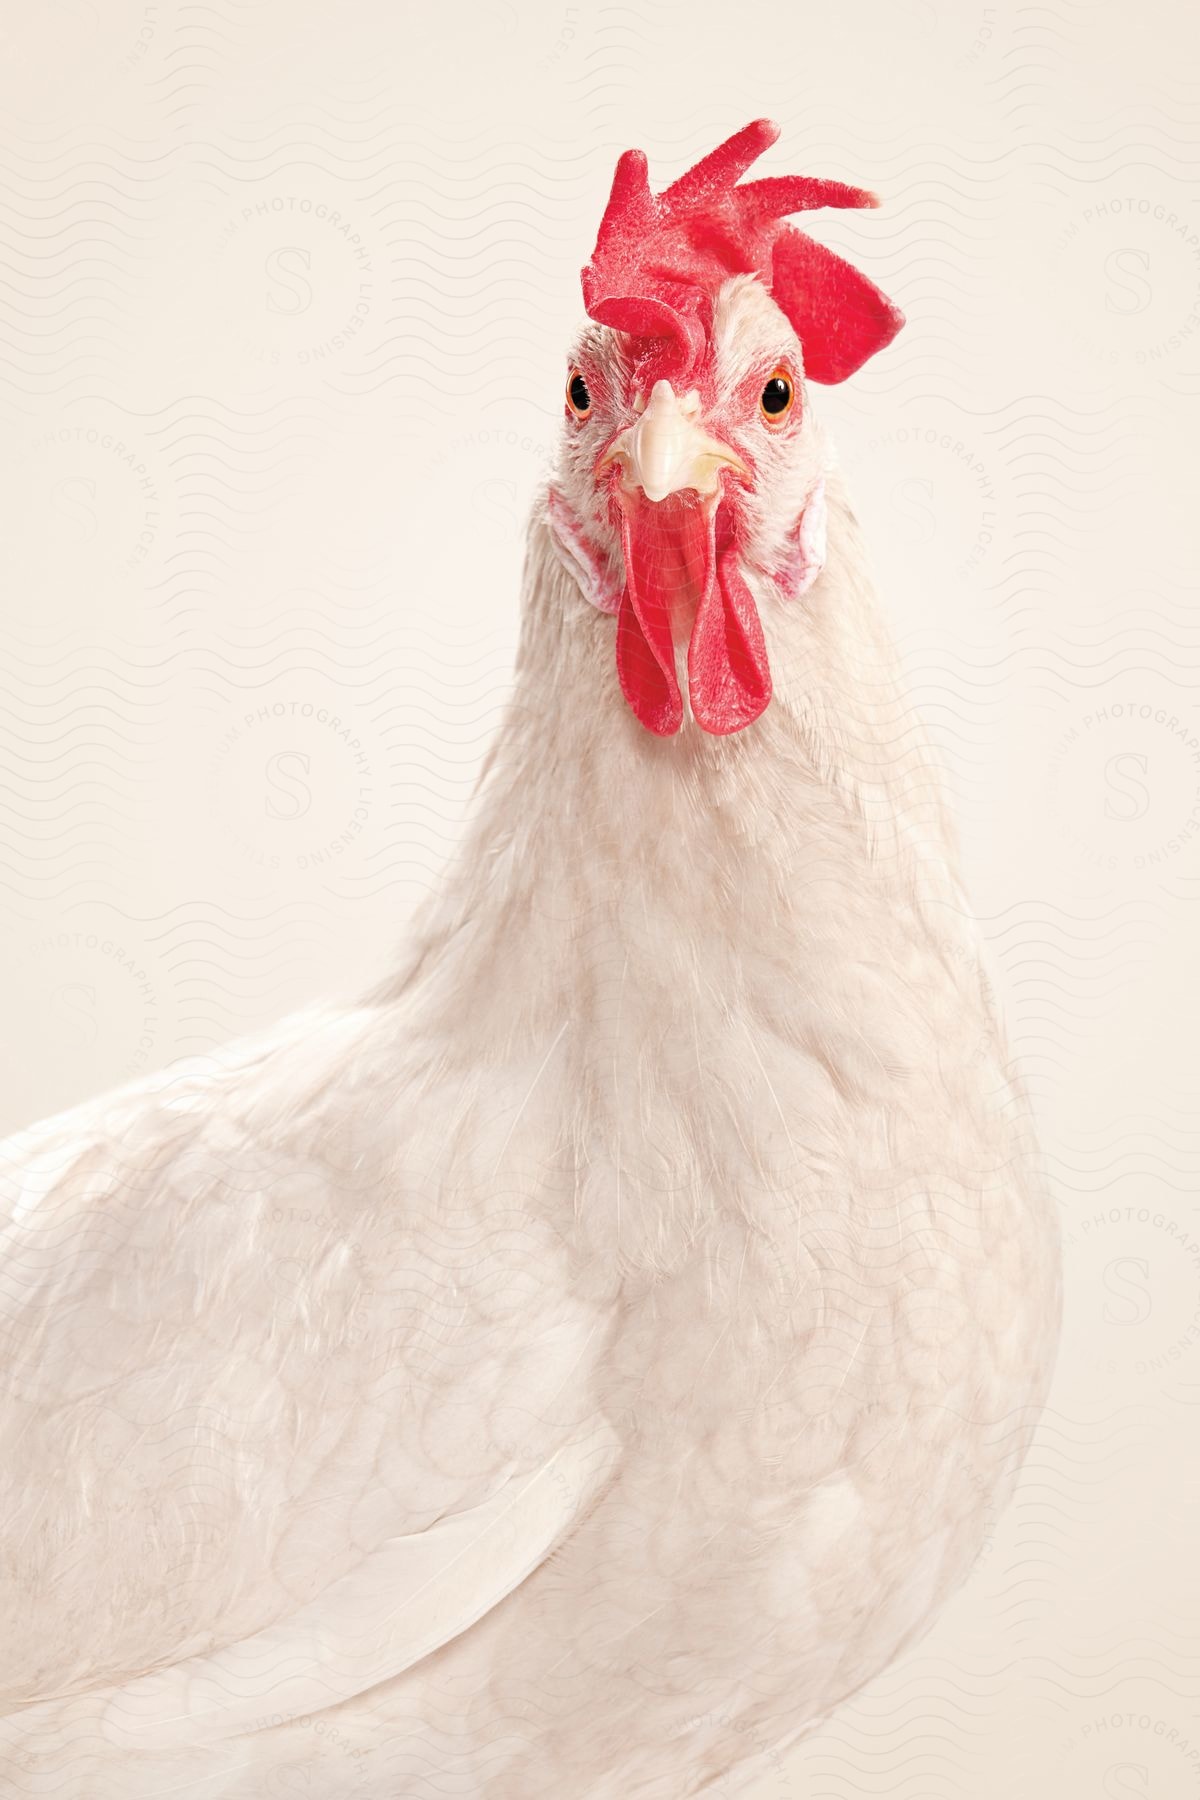 White feathered rooster with red comb stares